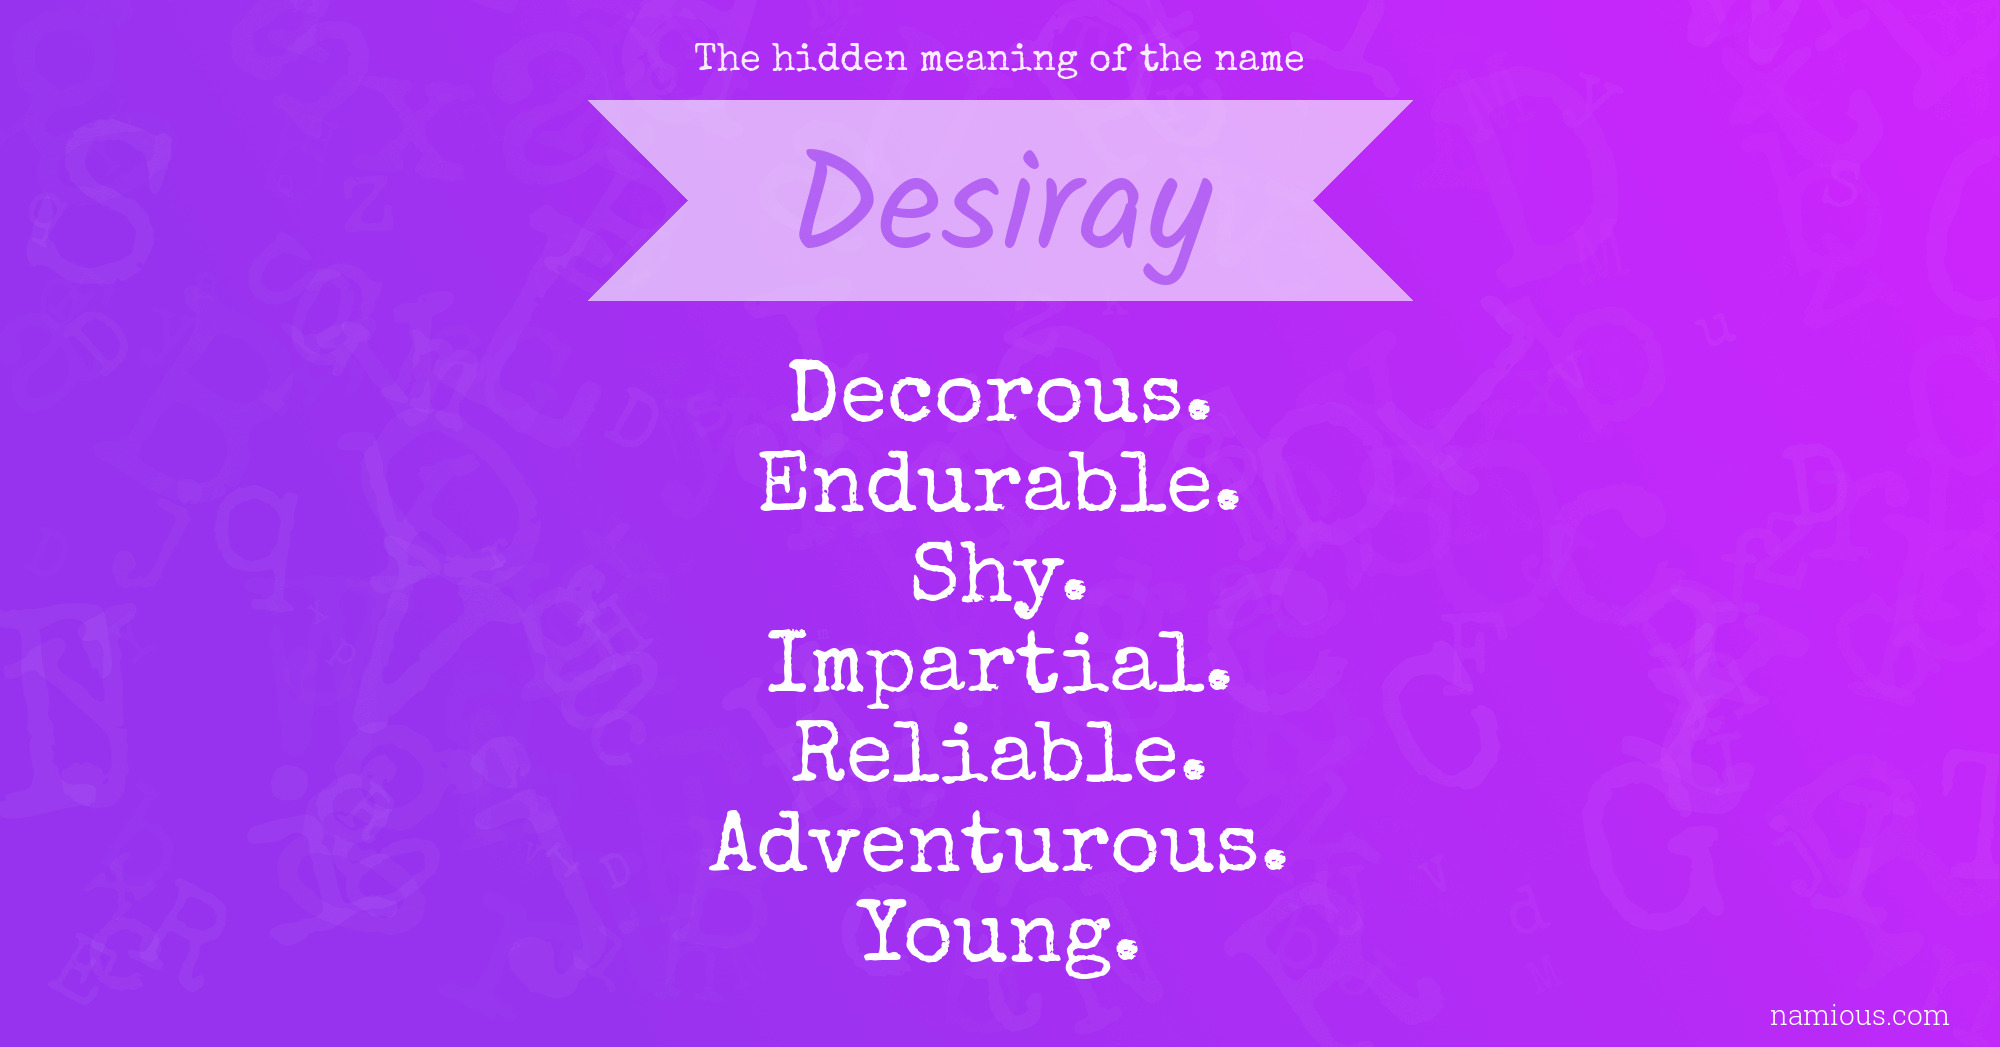 The hidden meaning of the name Desiray